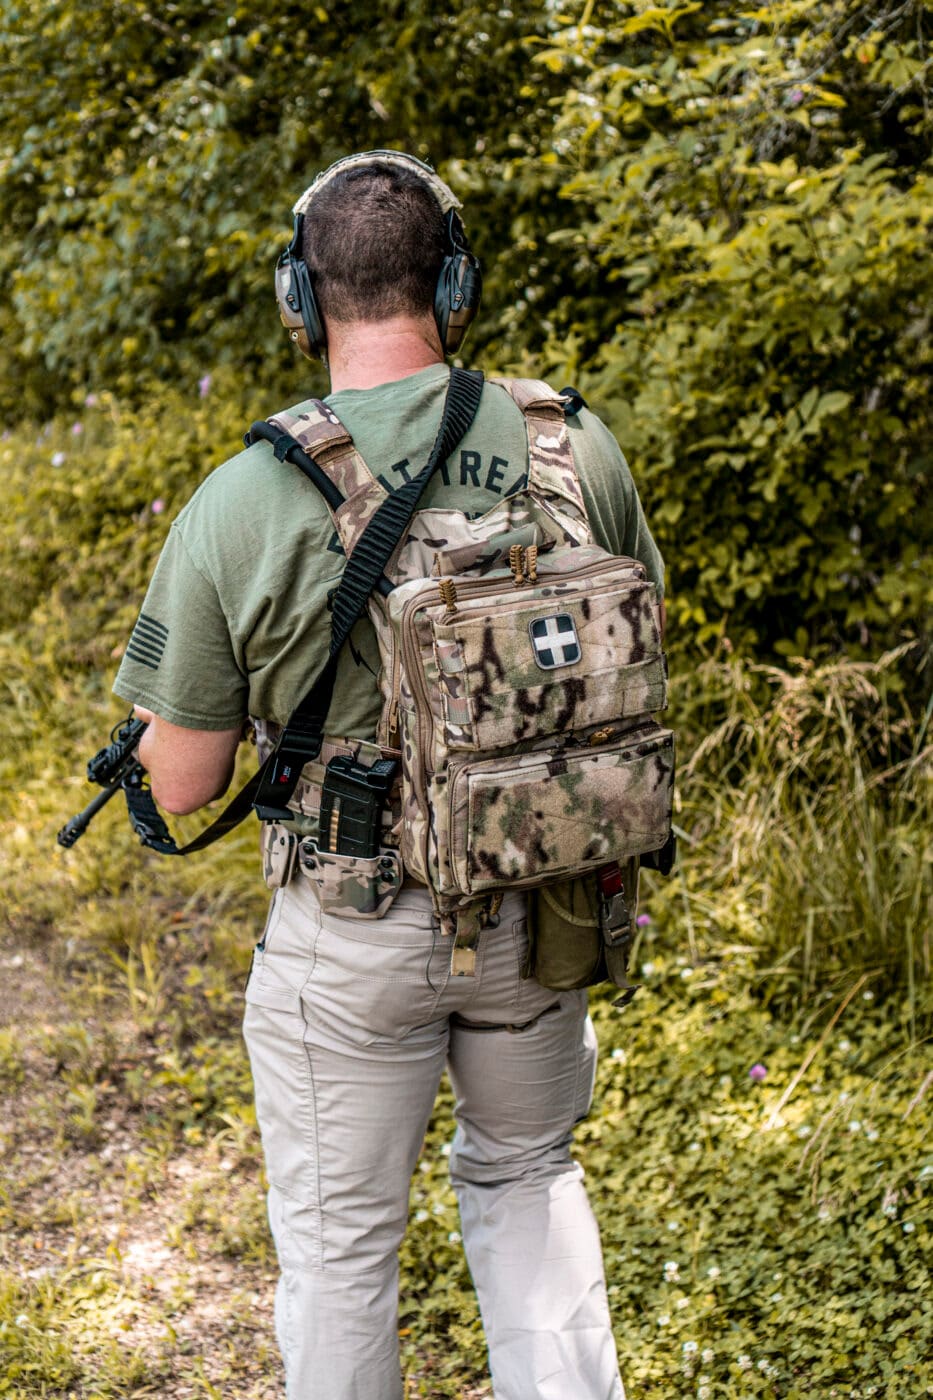 Rear view of man wearing plate carrier with battle belt